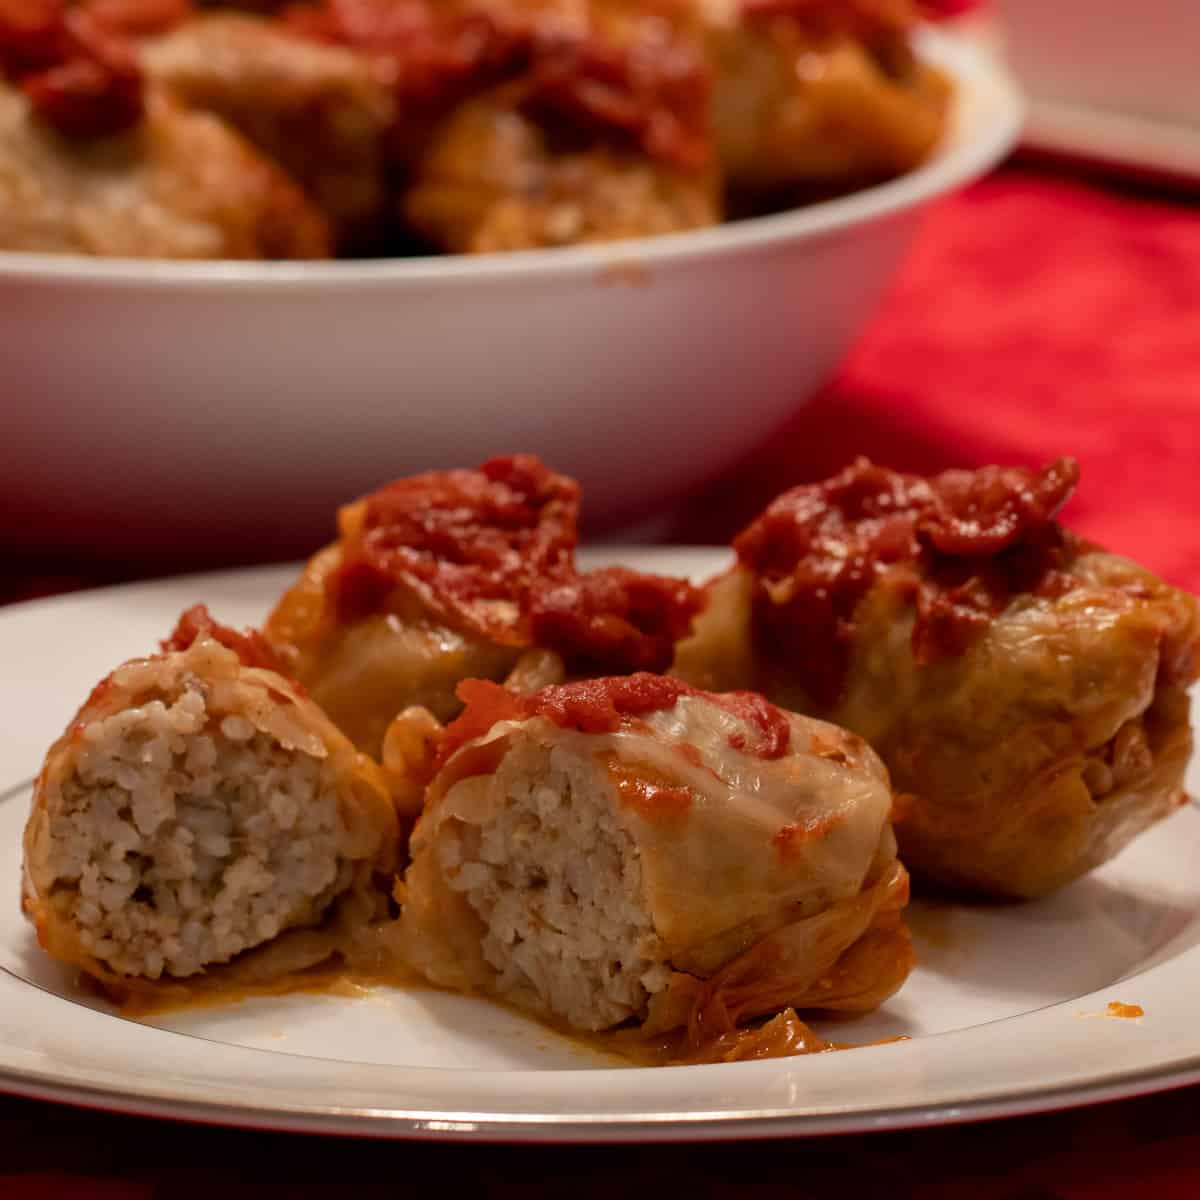 A close up picture of a plate of cabbage rolls.